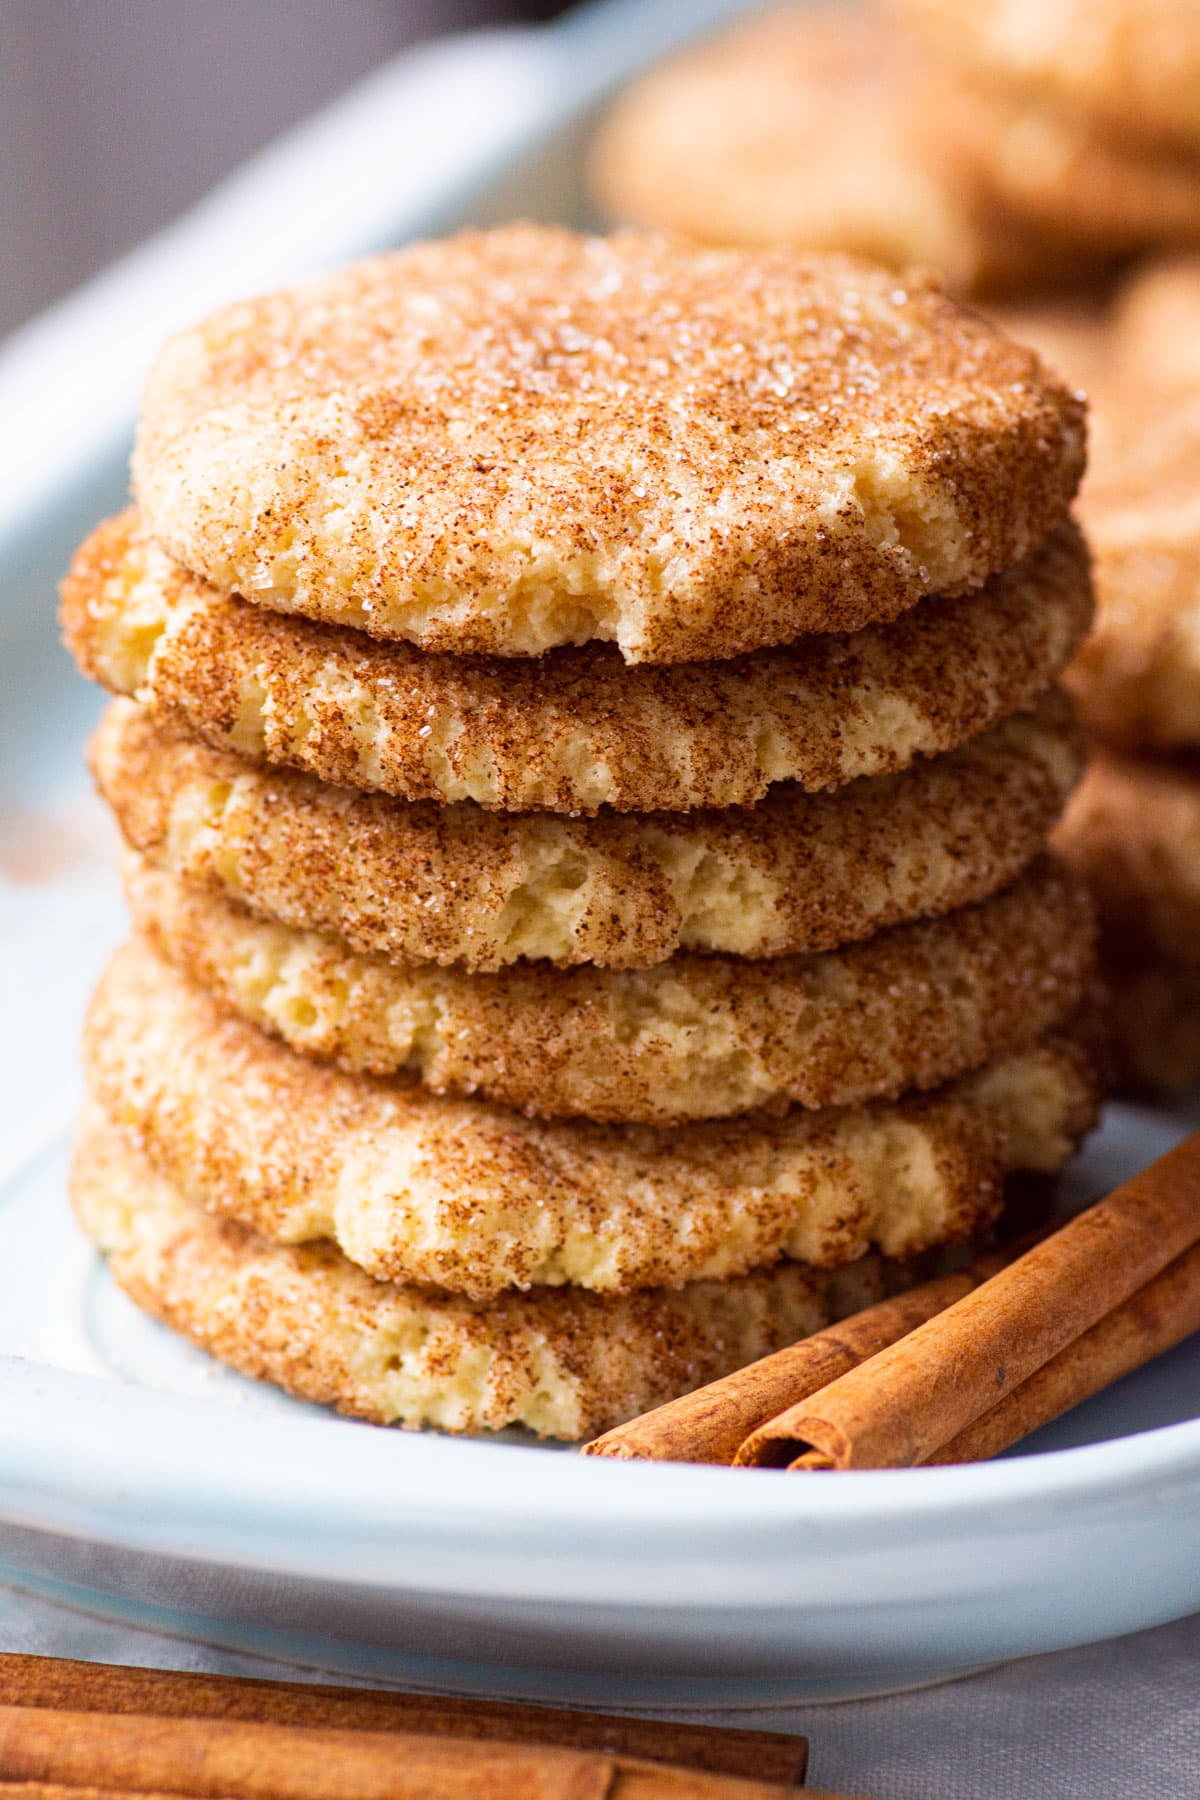 Almond flour snickerdoodles stacked on a plate with cinnamon sticks.